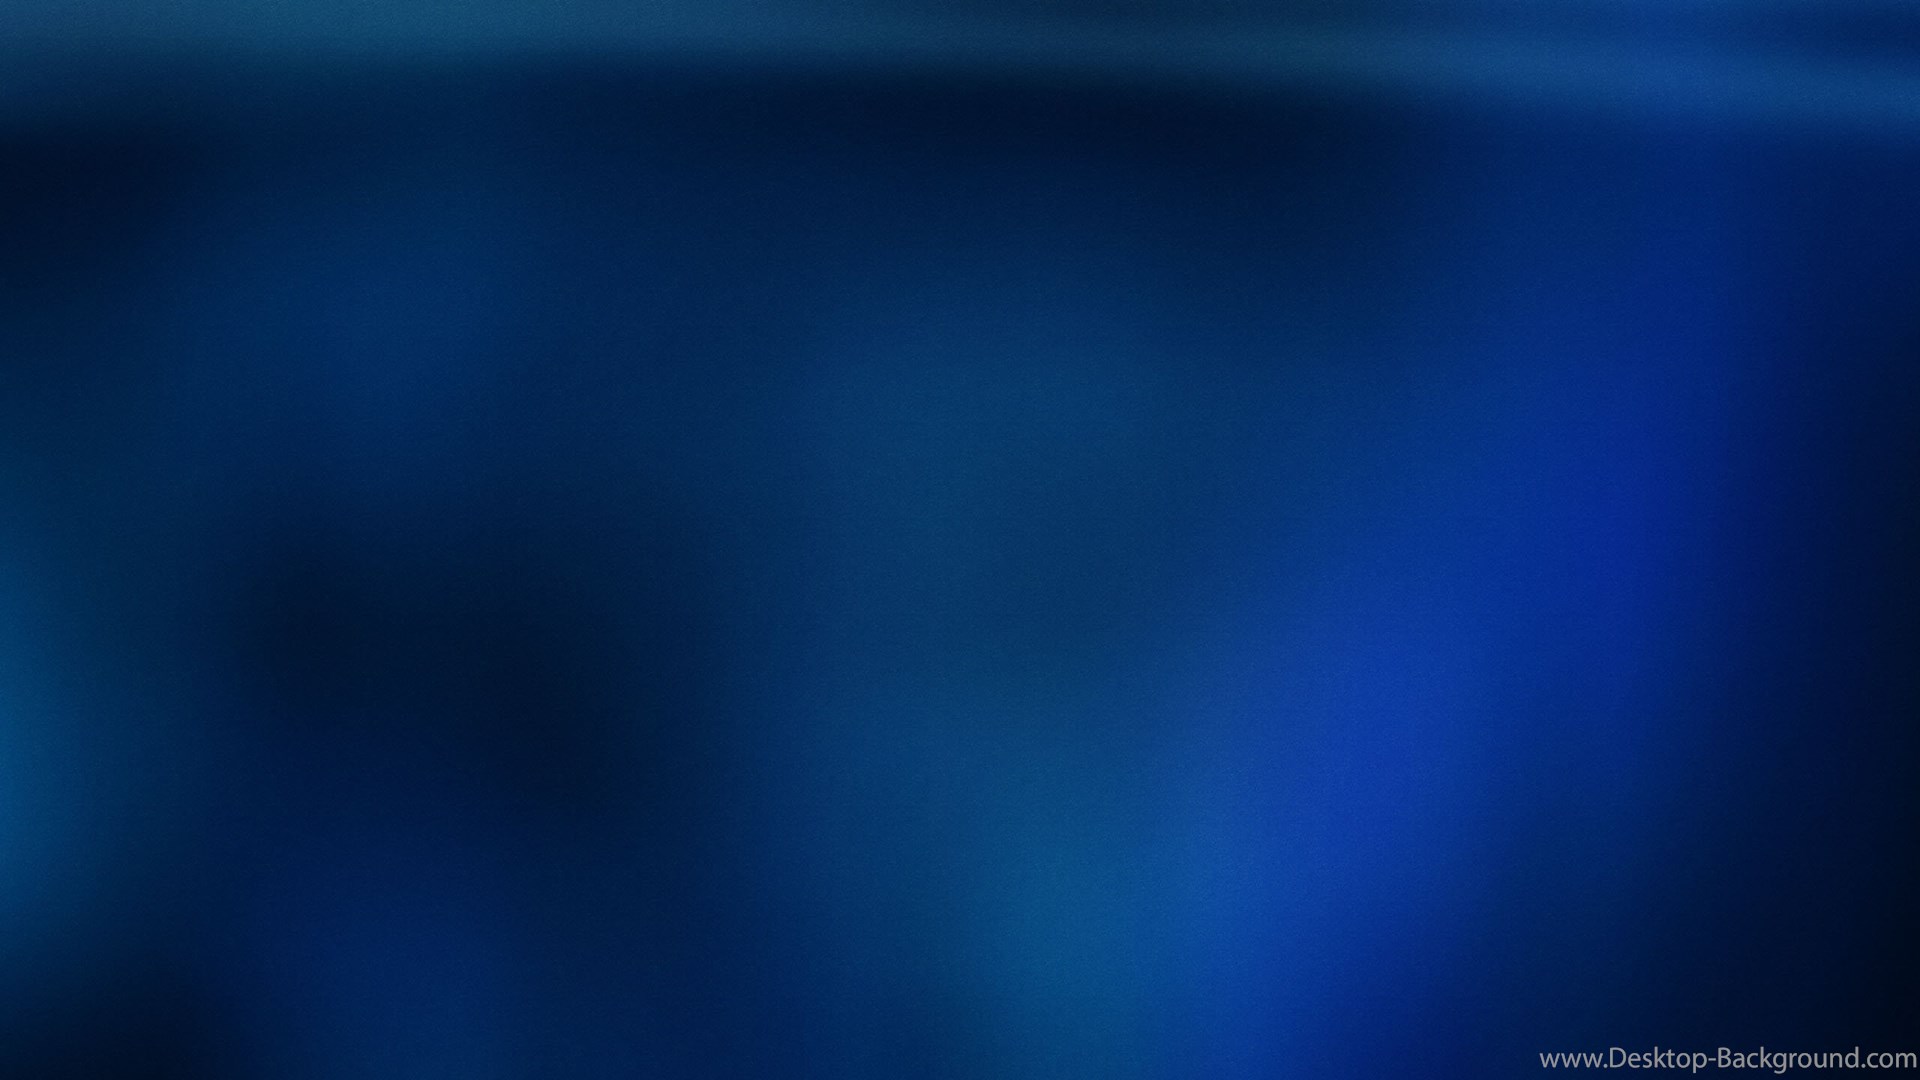 Cool Blue Backgrounds 1920x1080